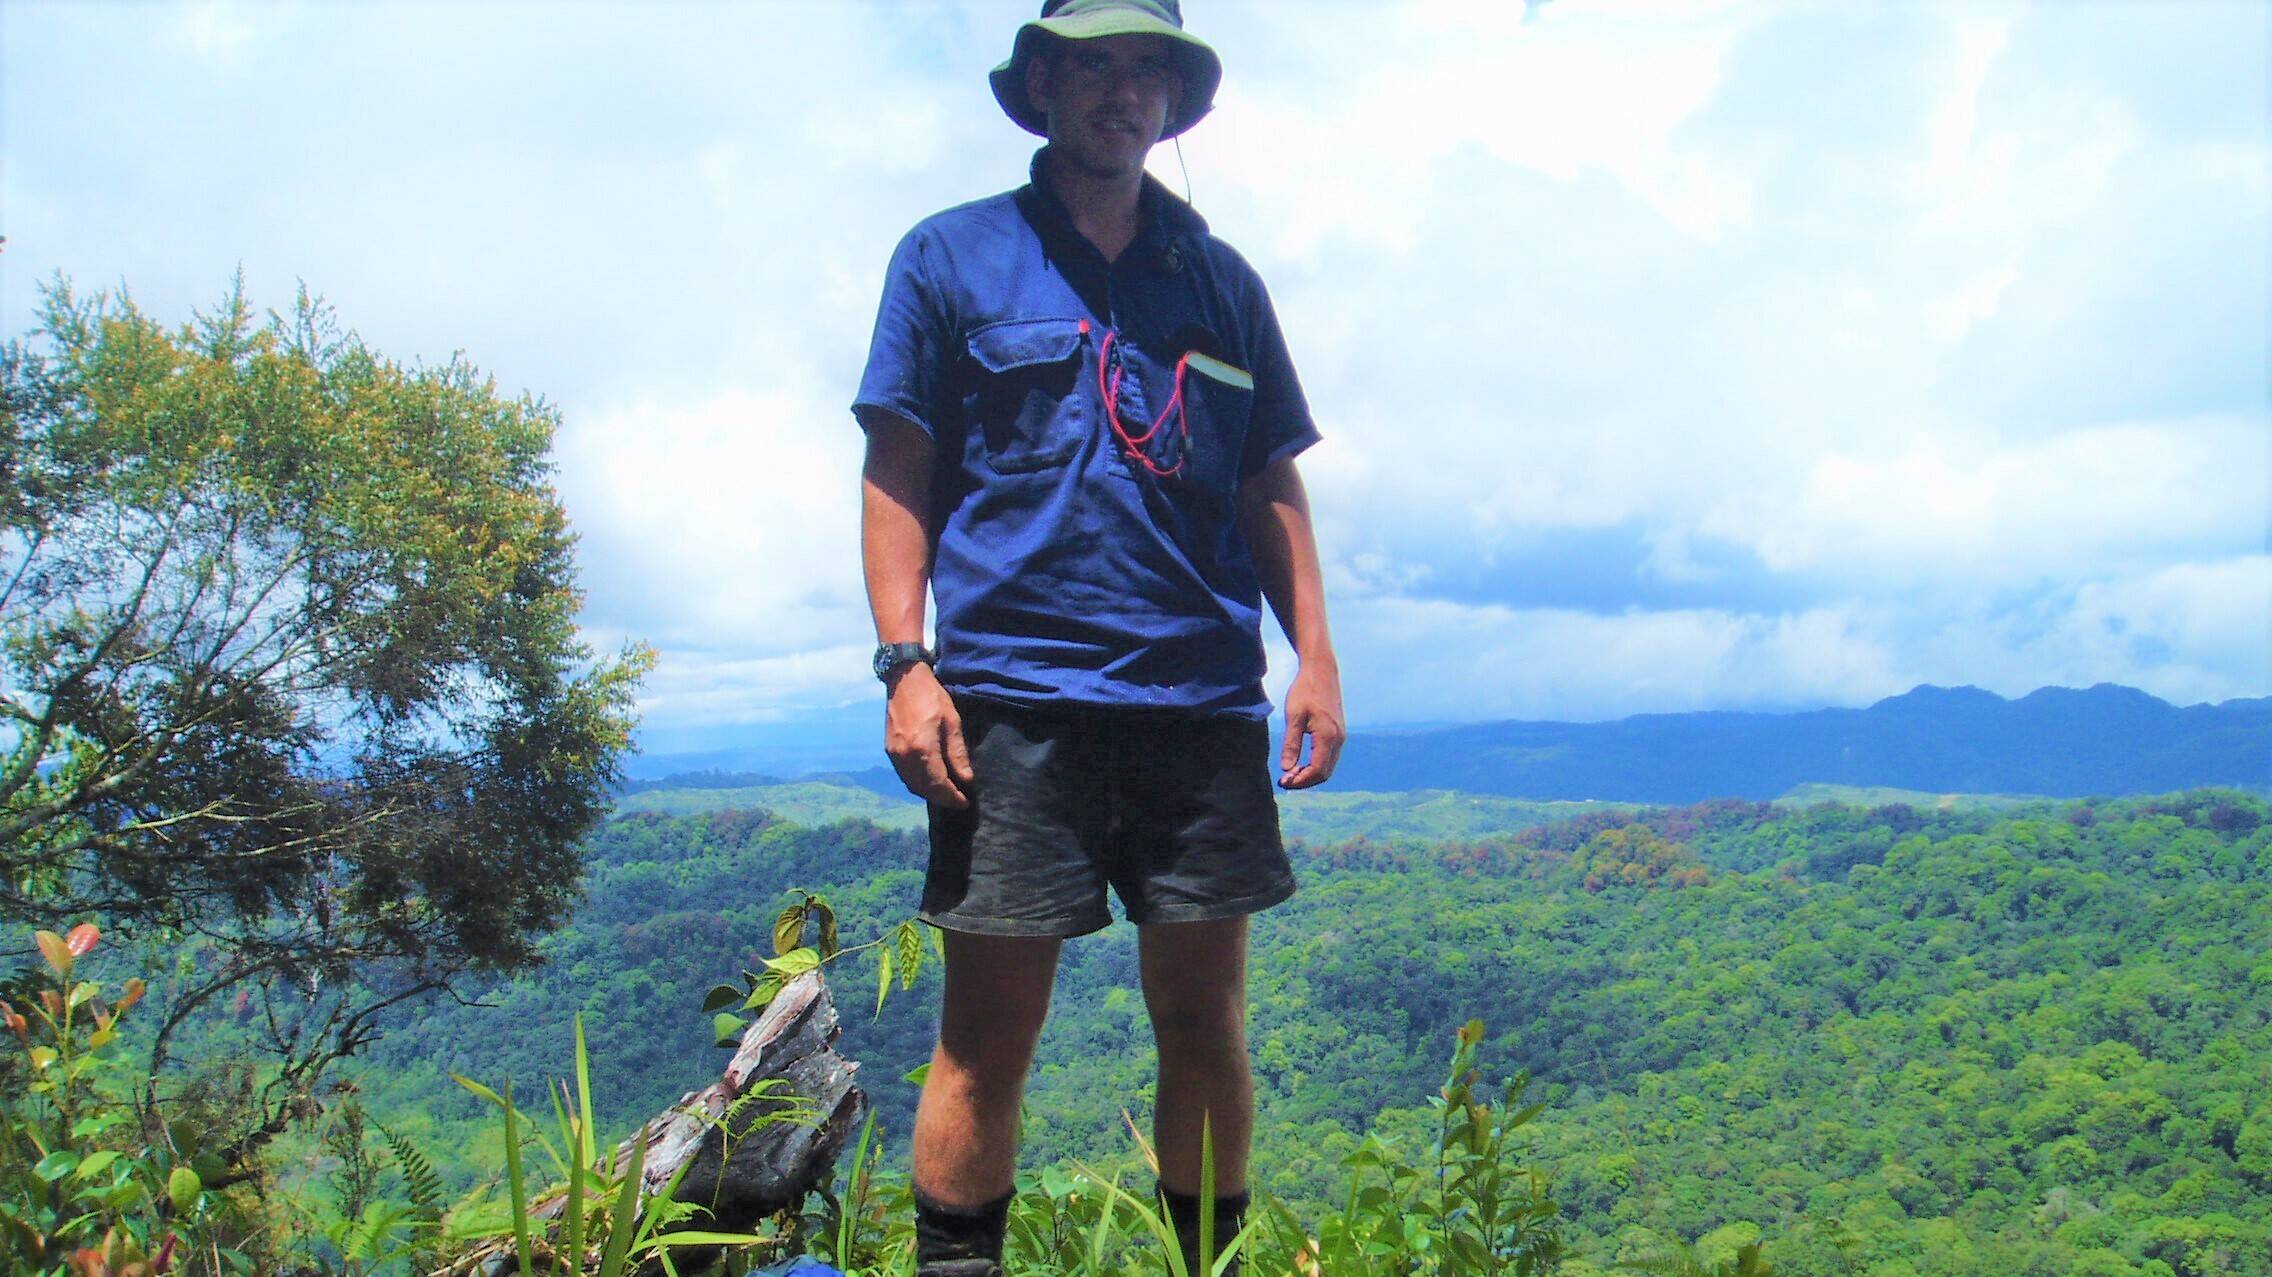 Image Geoscience Technical Team Lead, Desmond, out in the field in Papua New Guinea.